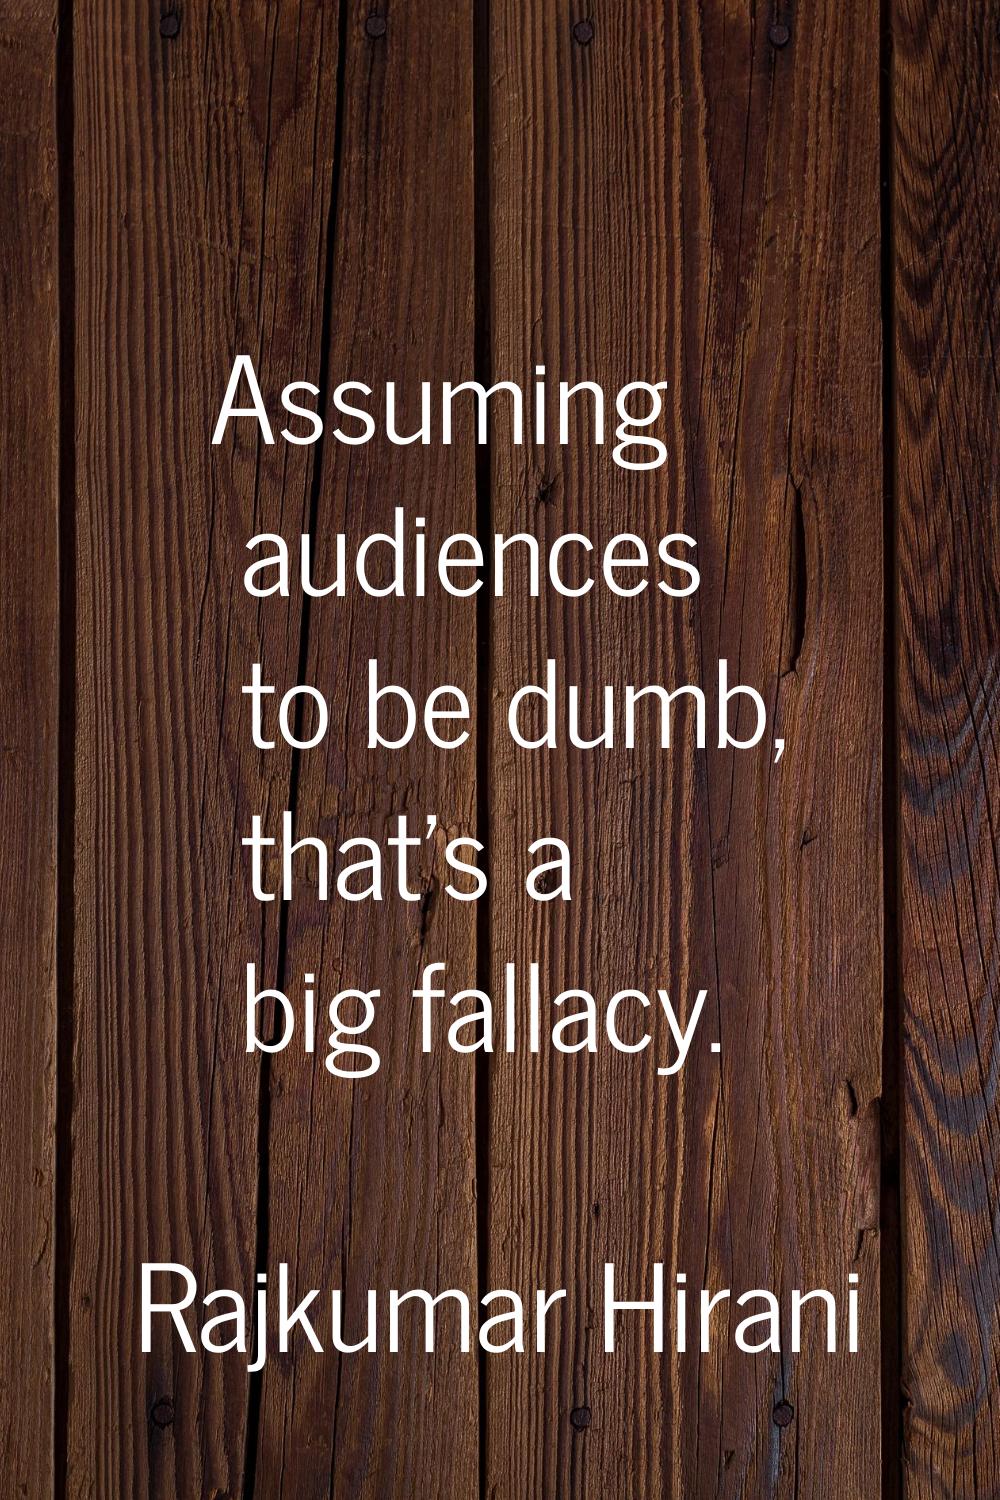 Assuming audiences to be dumb, that's a big fallacy.